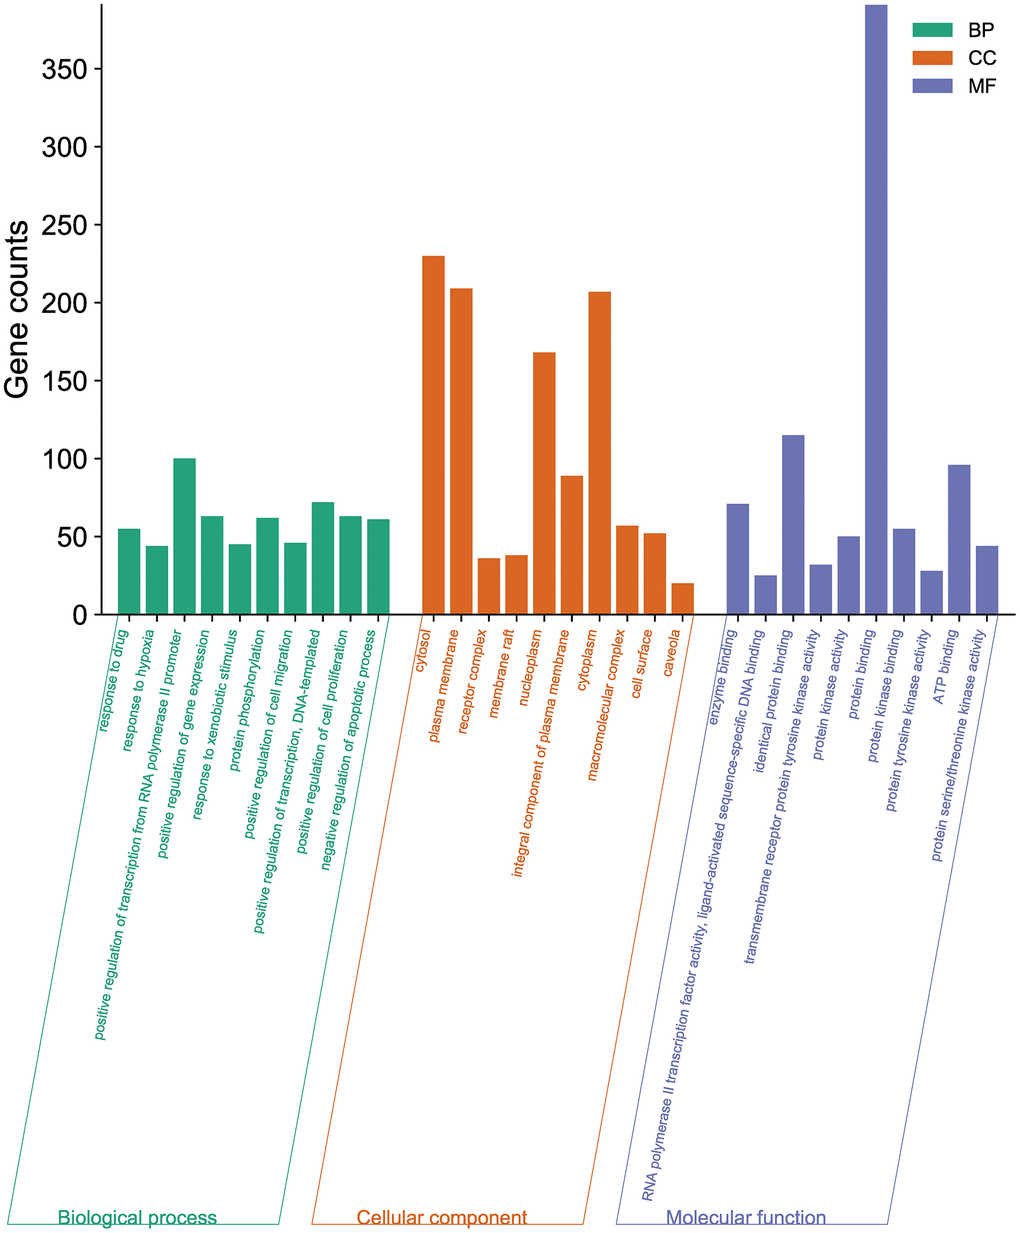 GO enrichment analysis of the potential targets of BXD against neuroinflammation using DAVID. Top 10 BP terms, CC terms, and MF terms are shown as green, orange, and purple bars, respectively.